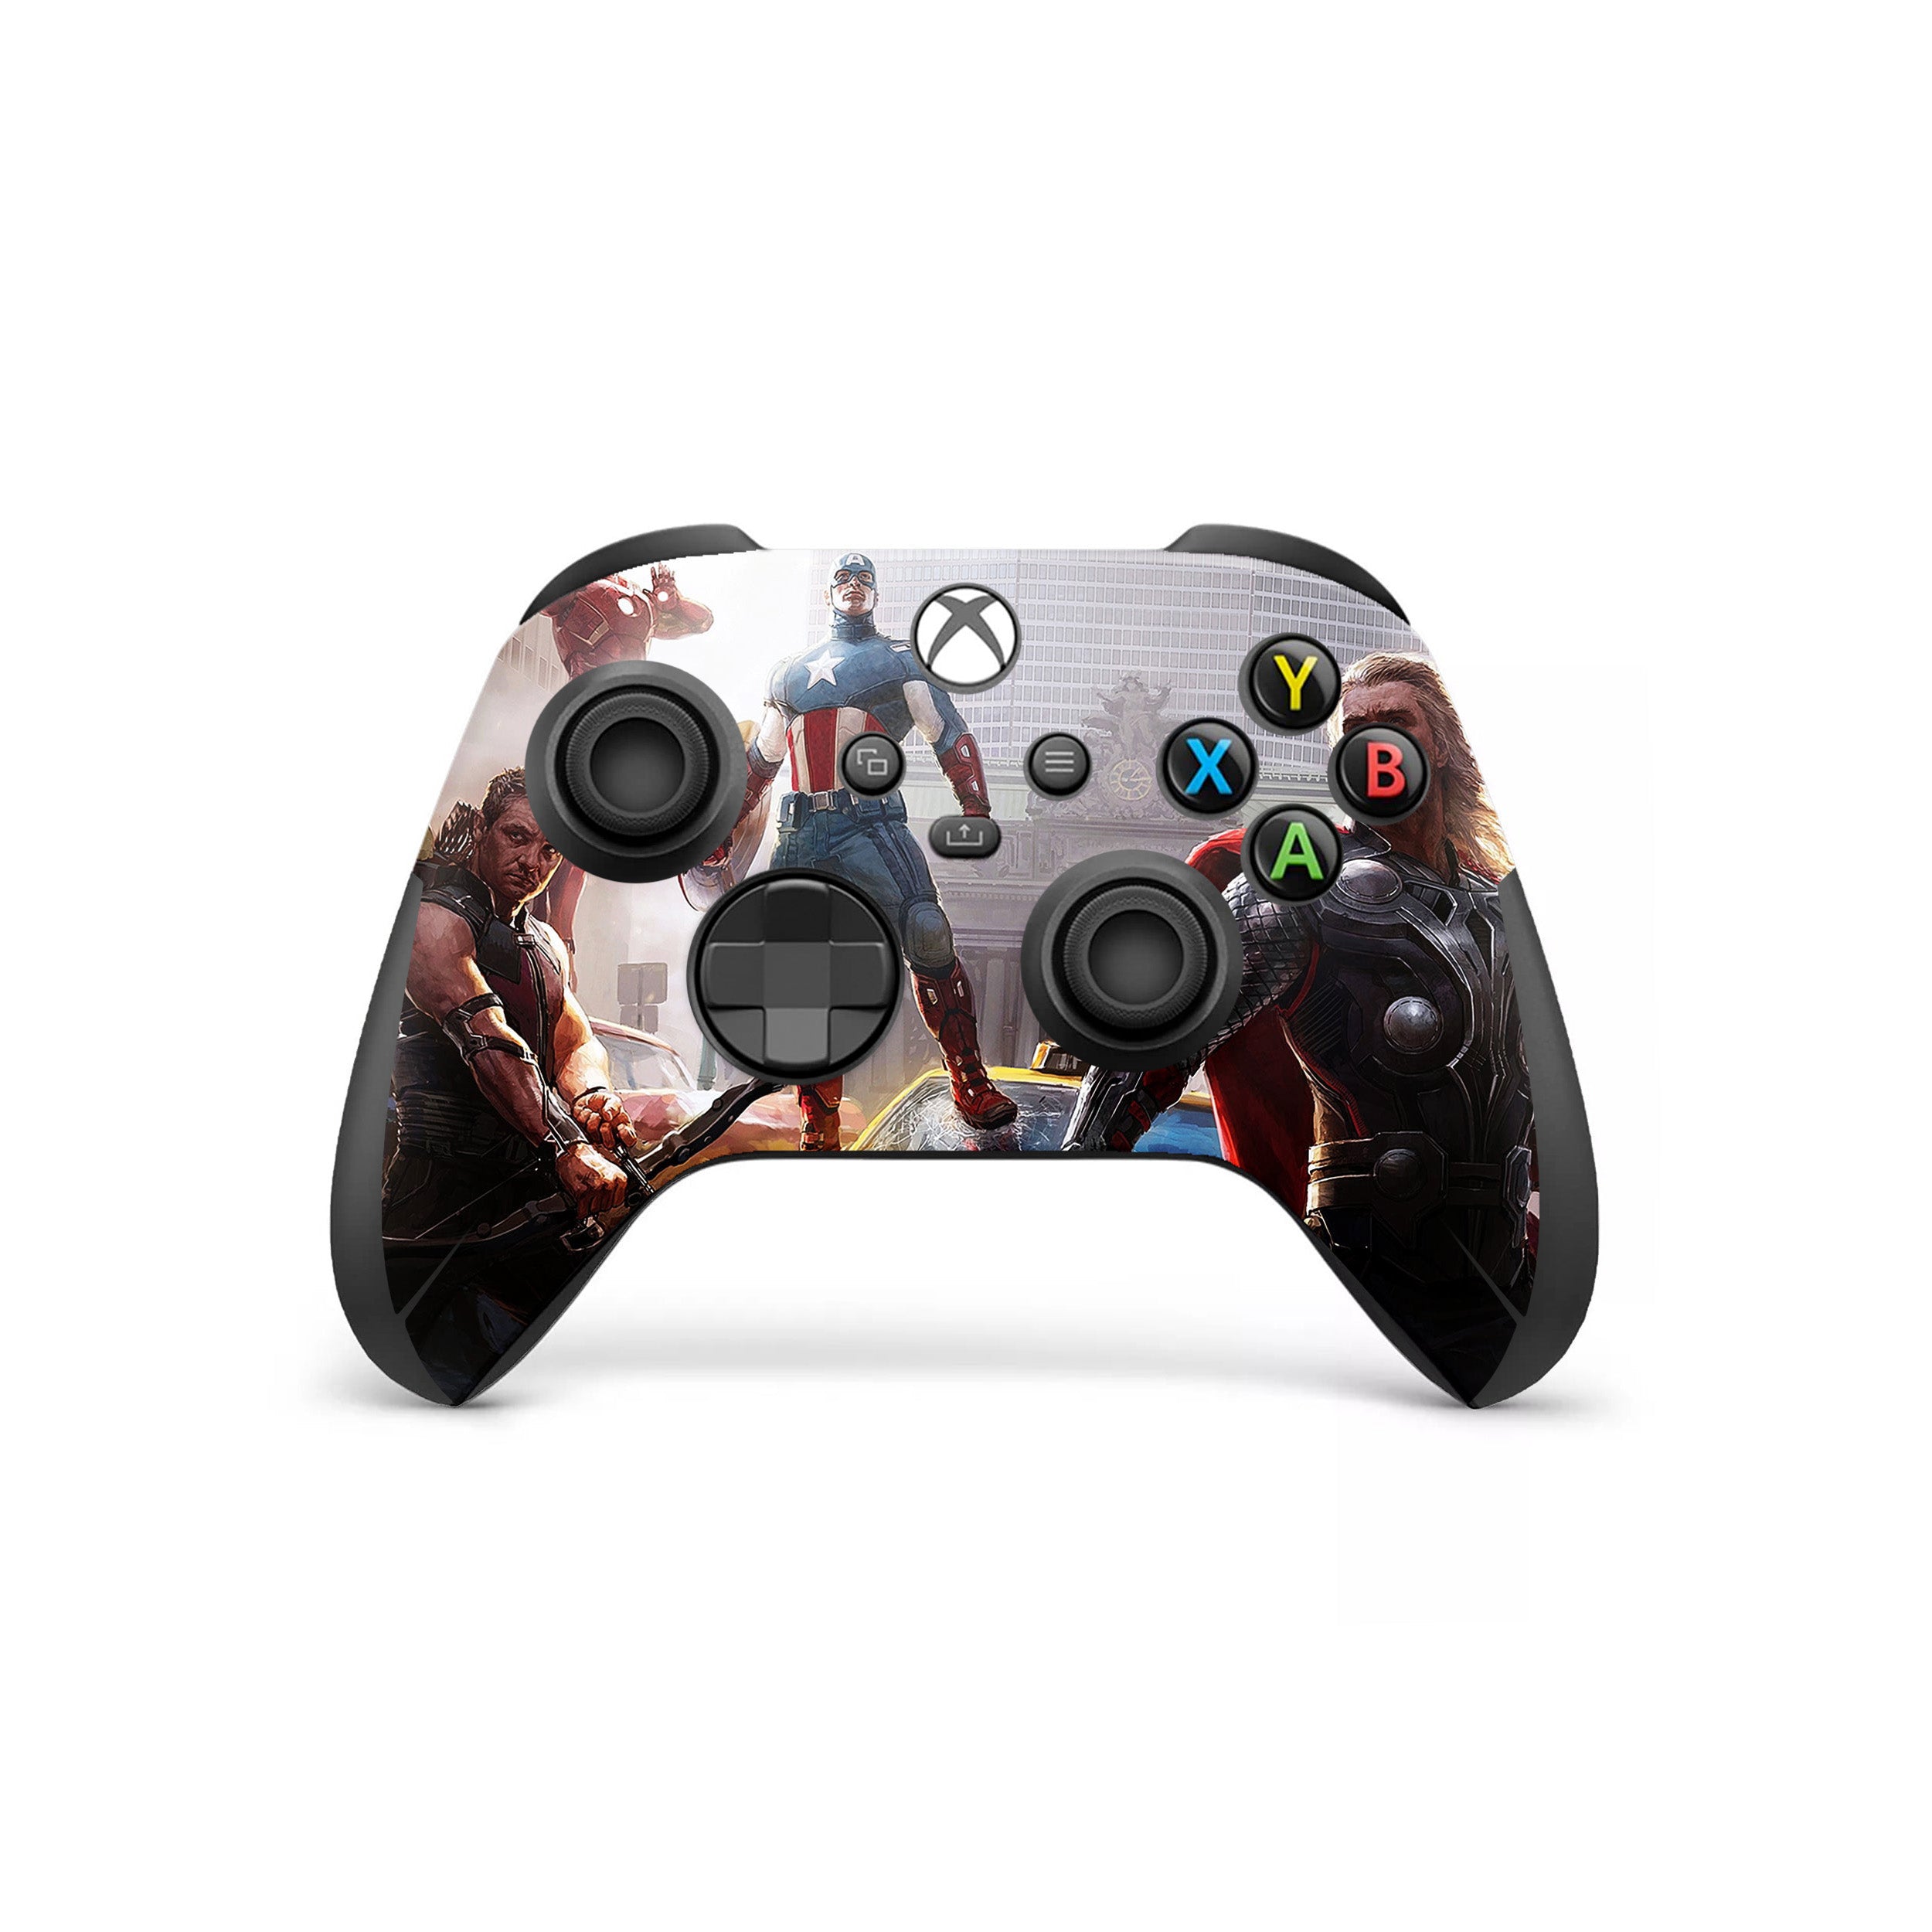 A video game skin featuring a Marvel Avengers design for the Xbox Wireless Controller.